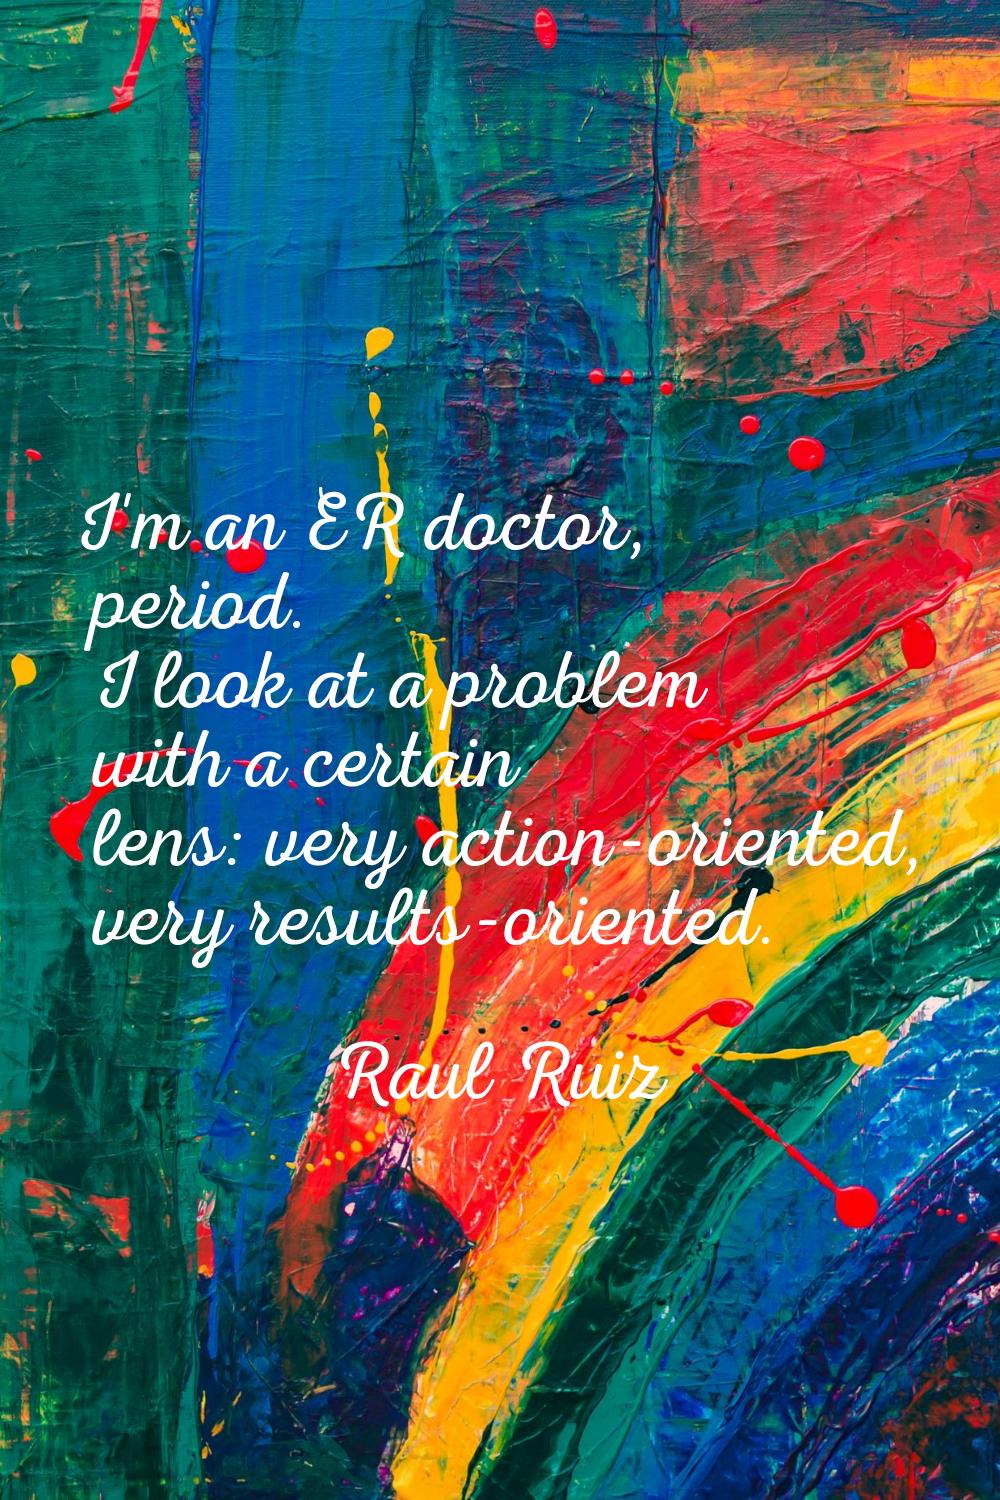 I'm an ER doctor, period. I look at a problem with a certain lens: very action-oriented, very resul